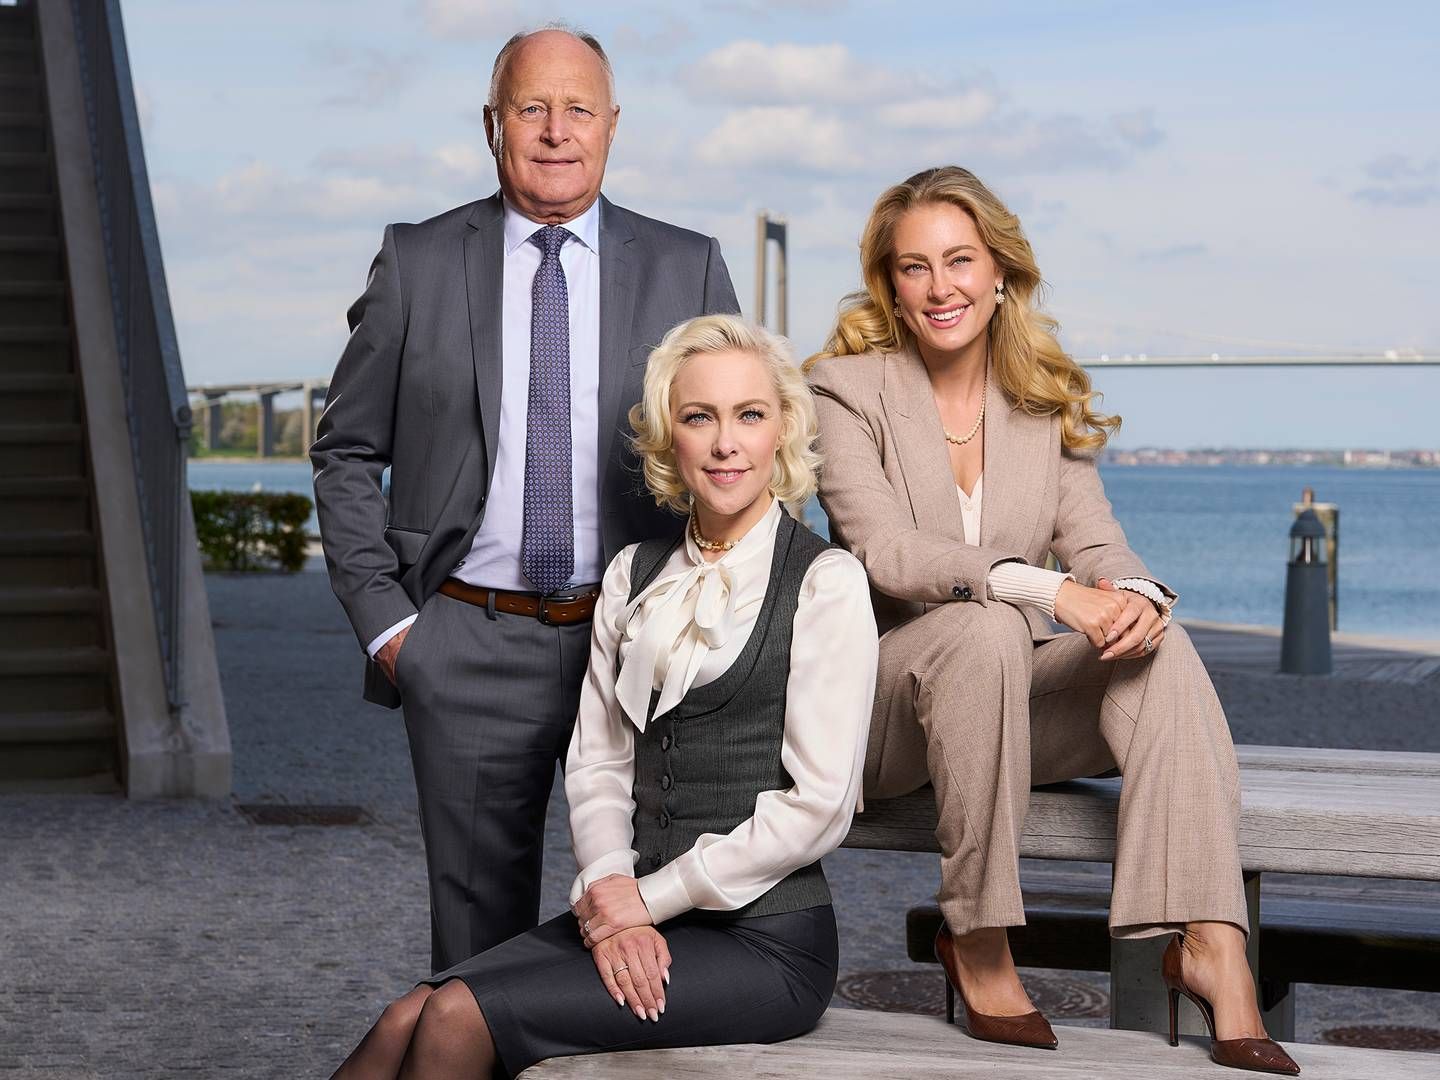 The owners of the USTC Group and the collapsed Nordic Waste, Torben Østergaard-Nielsen, Nina Østergaard Borris (center) and Mia Østergaard Rechnitzer, deliver yet another financial report with high earnings and can add to their personal fortune. | Foto: PR-foto USTC-koncernen